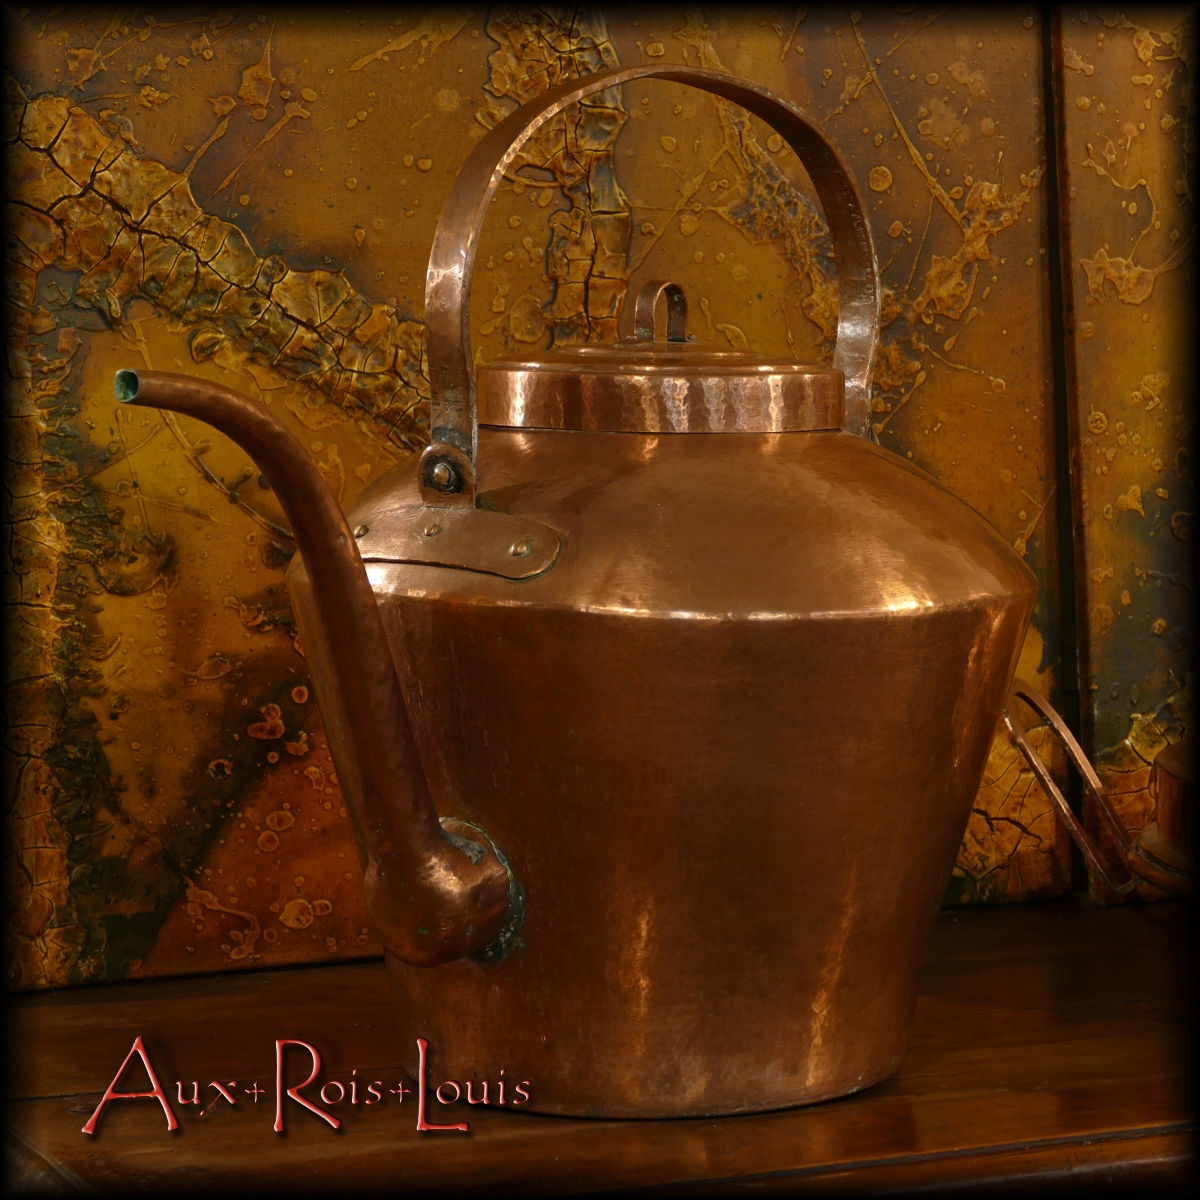 This large copper kettle made in the 18th century in the South West of France was used, in a Médoc wine estate, to heat water for the kitchens as well as for the baths of the whole family.